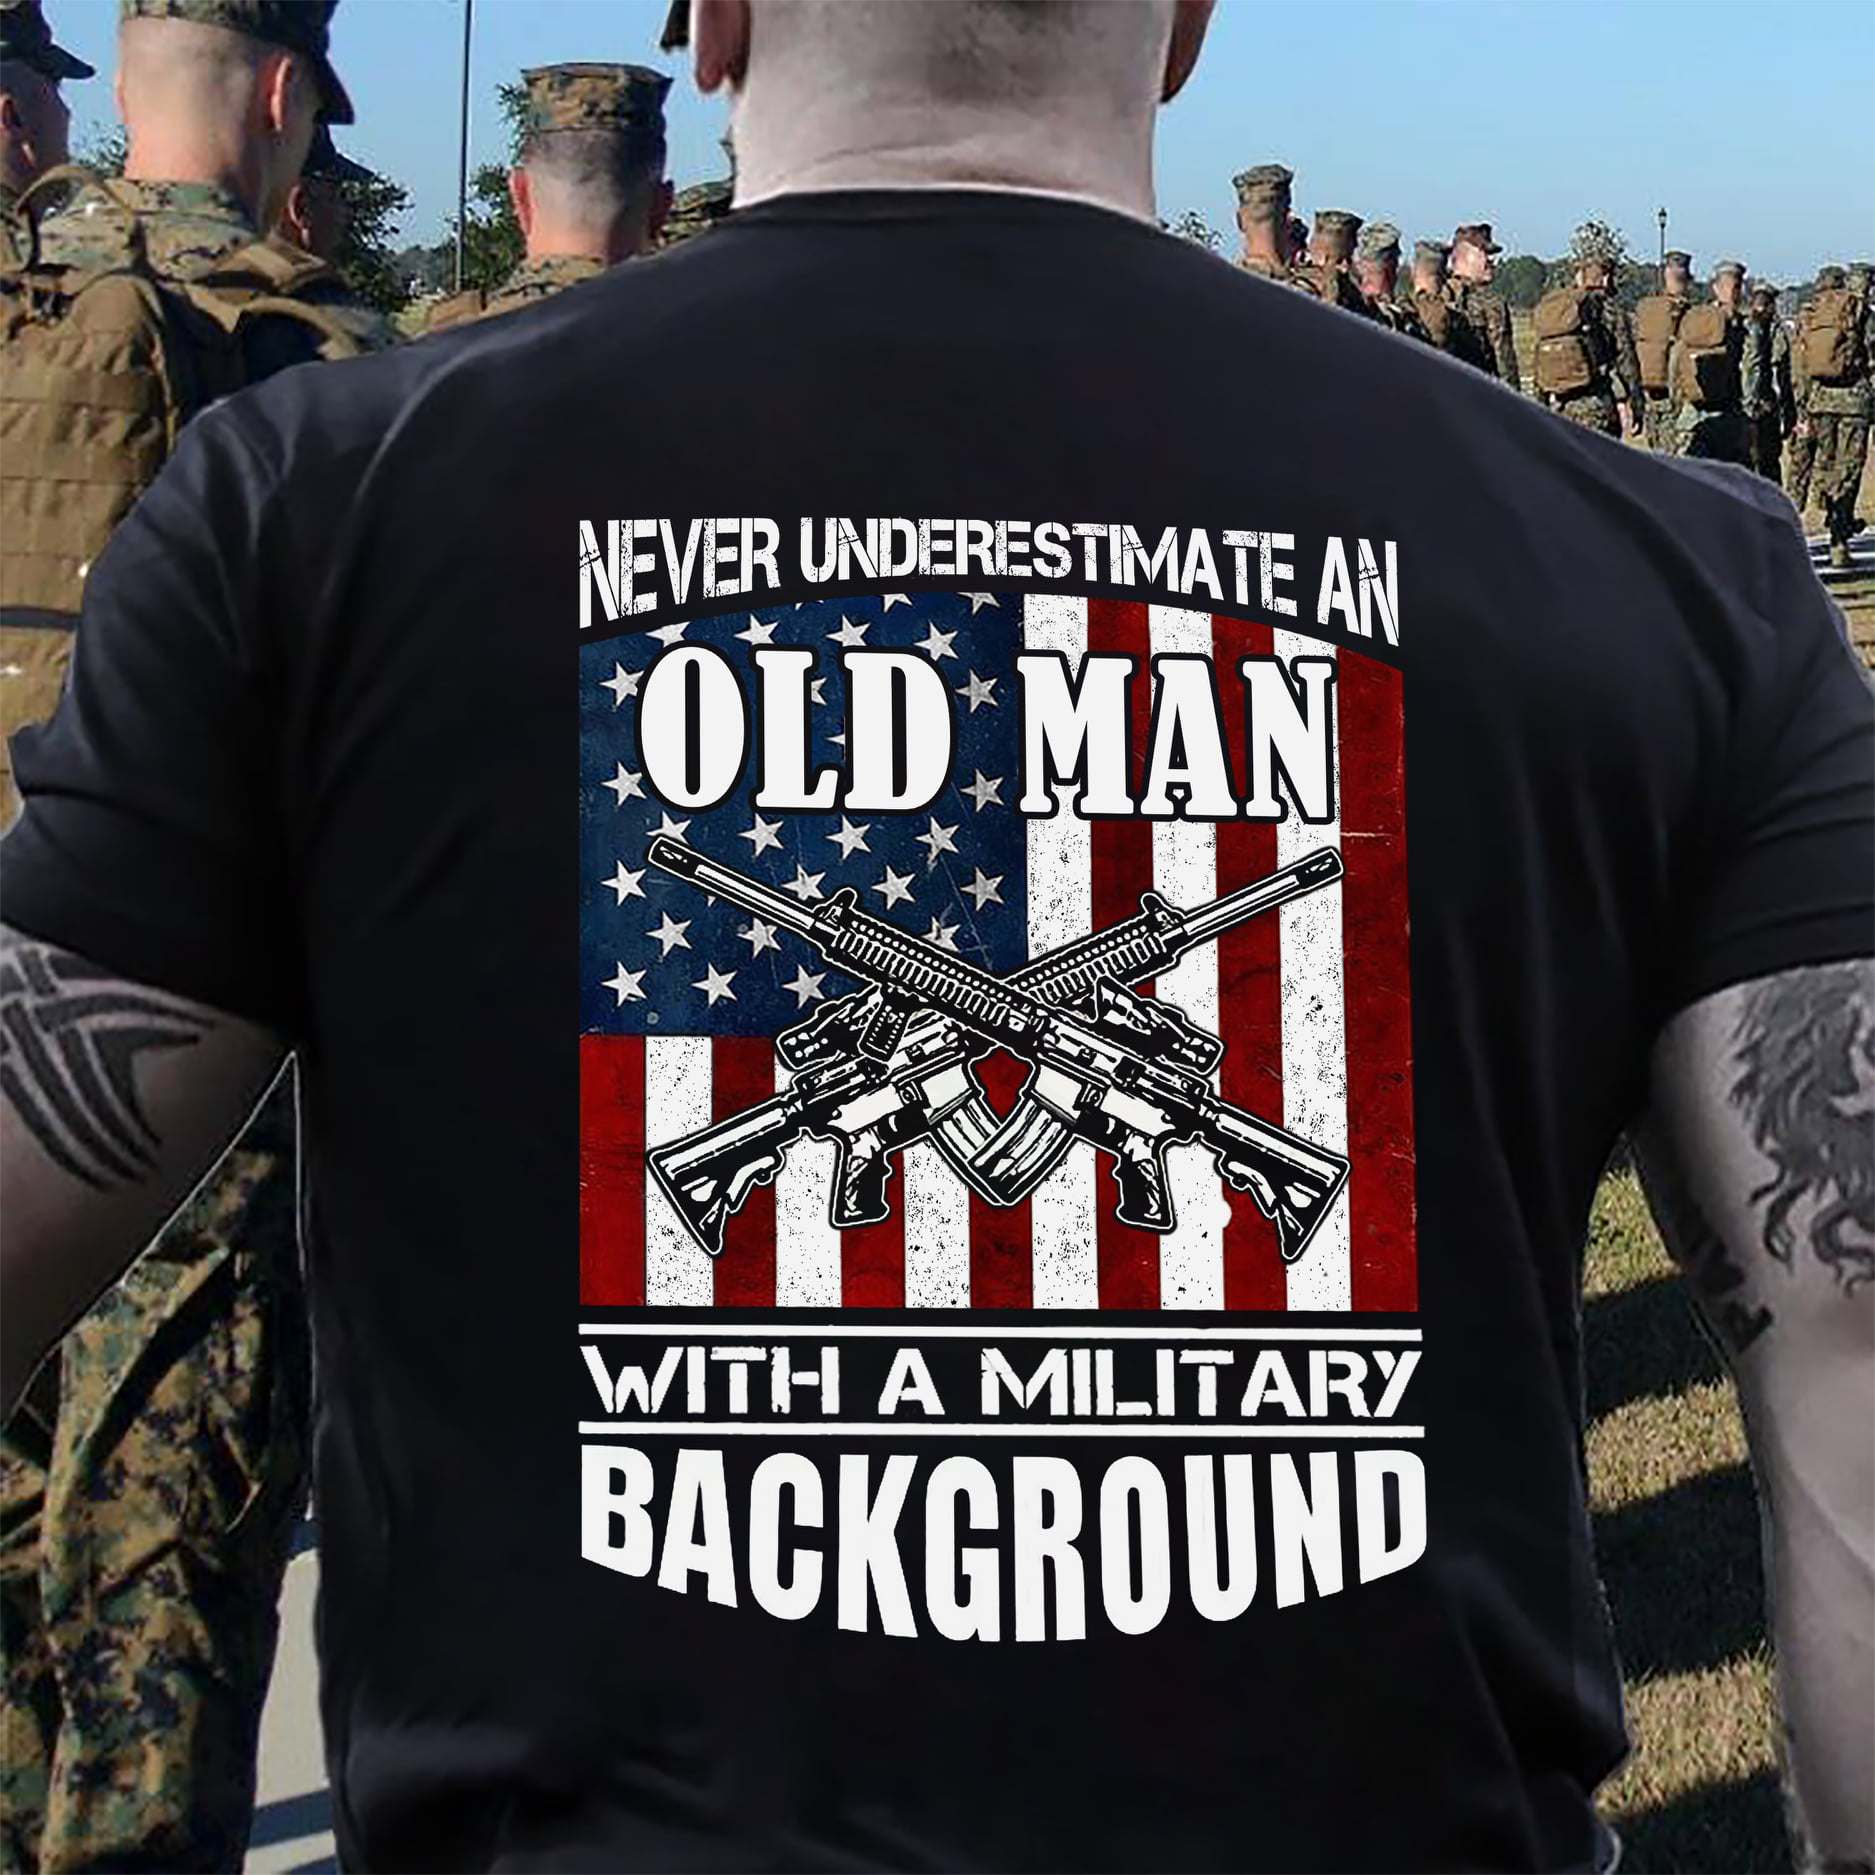 Never underestimate an old man with a military background - Old man veteran